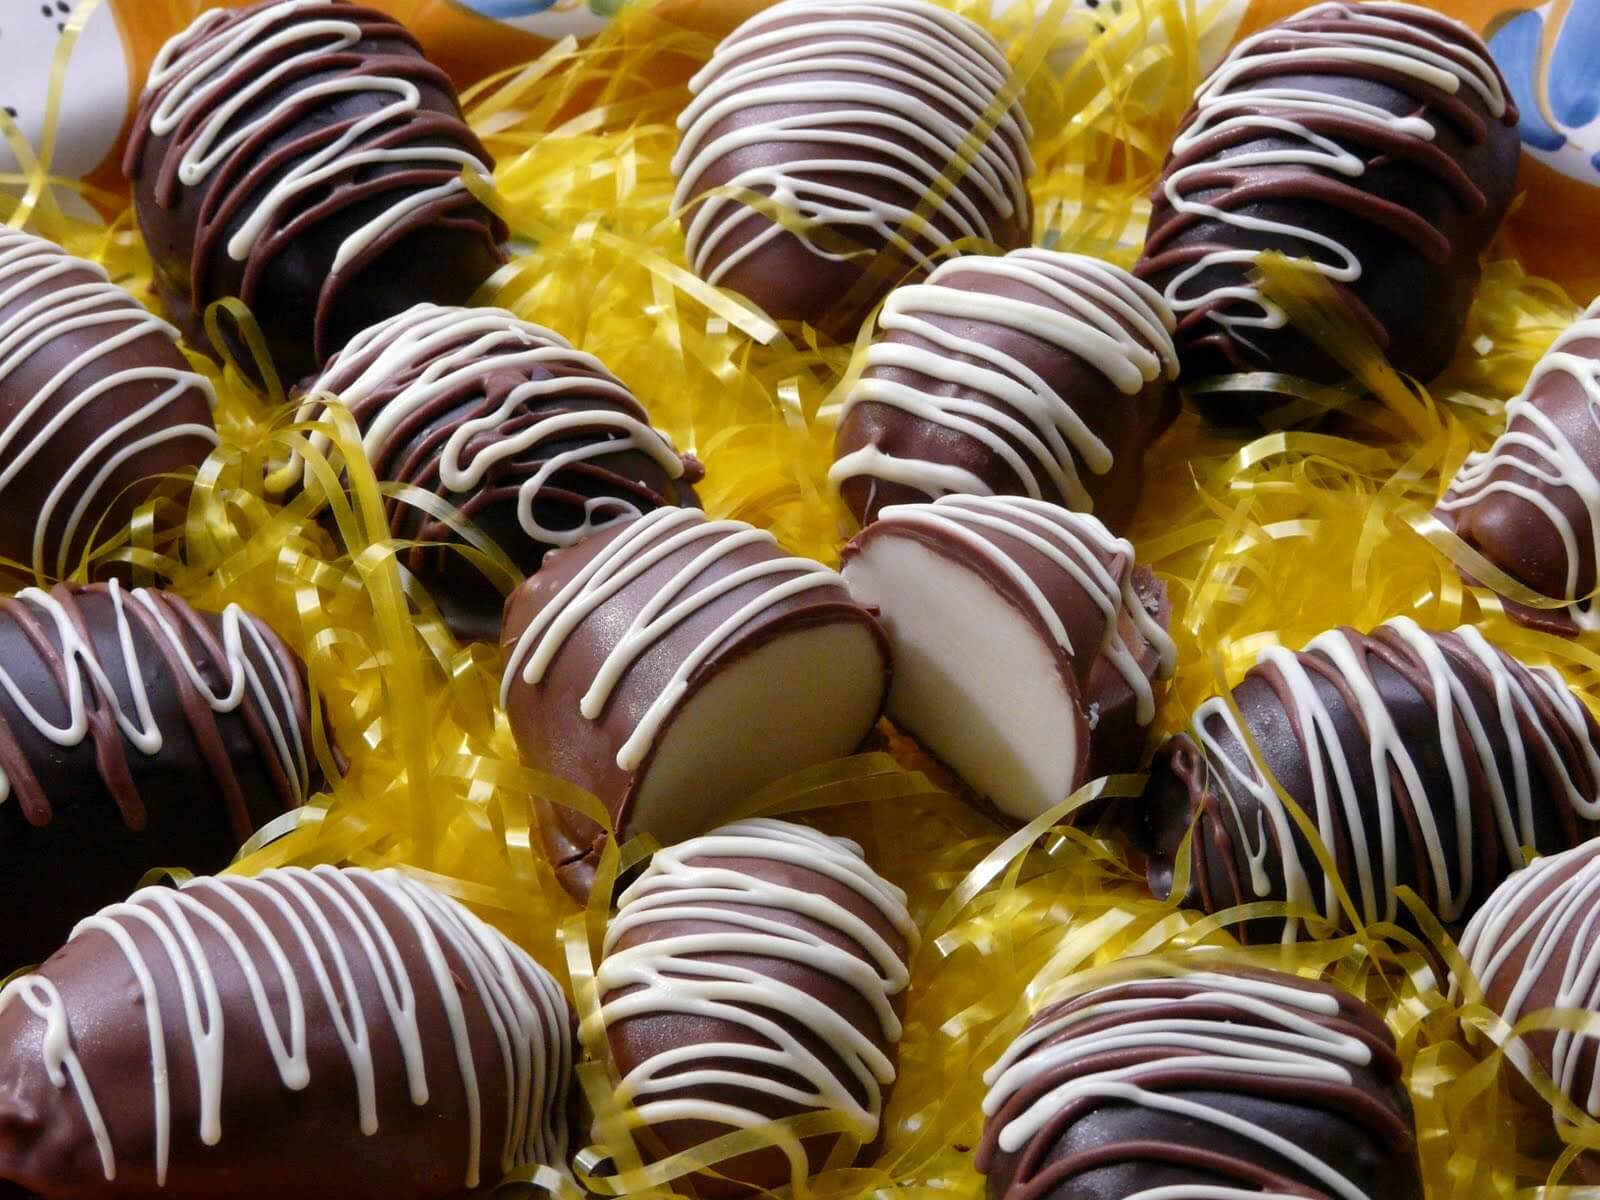 National Cream Filled Chocolate Day 2018 - February 14